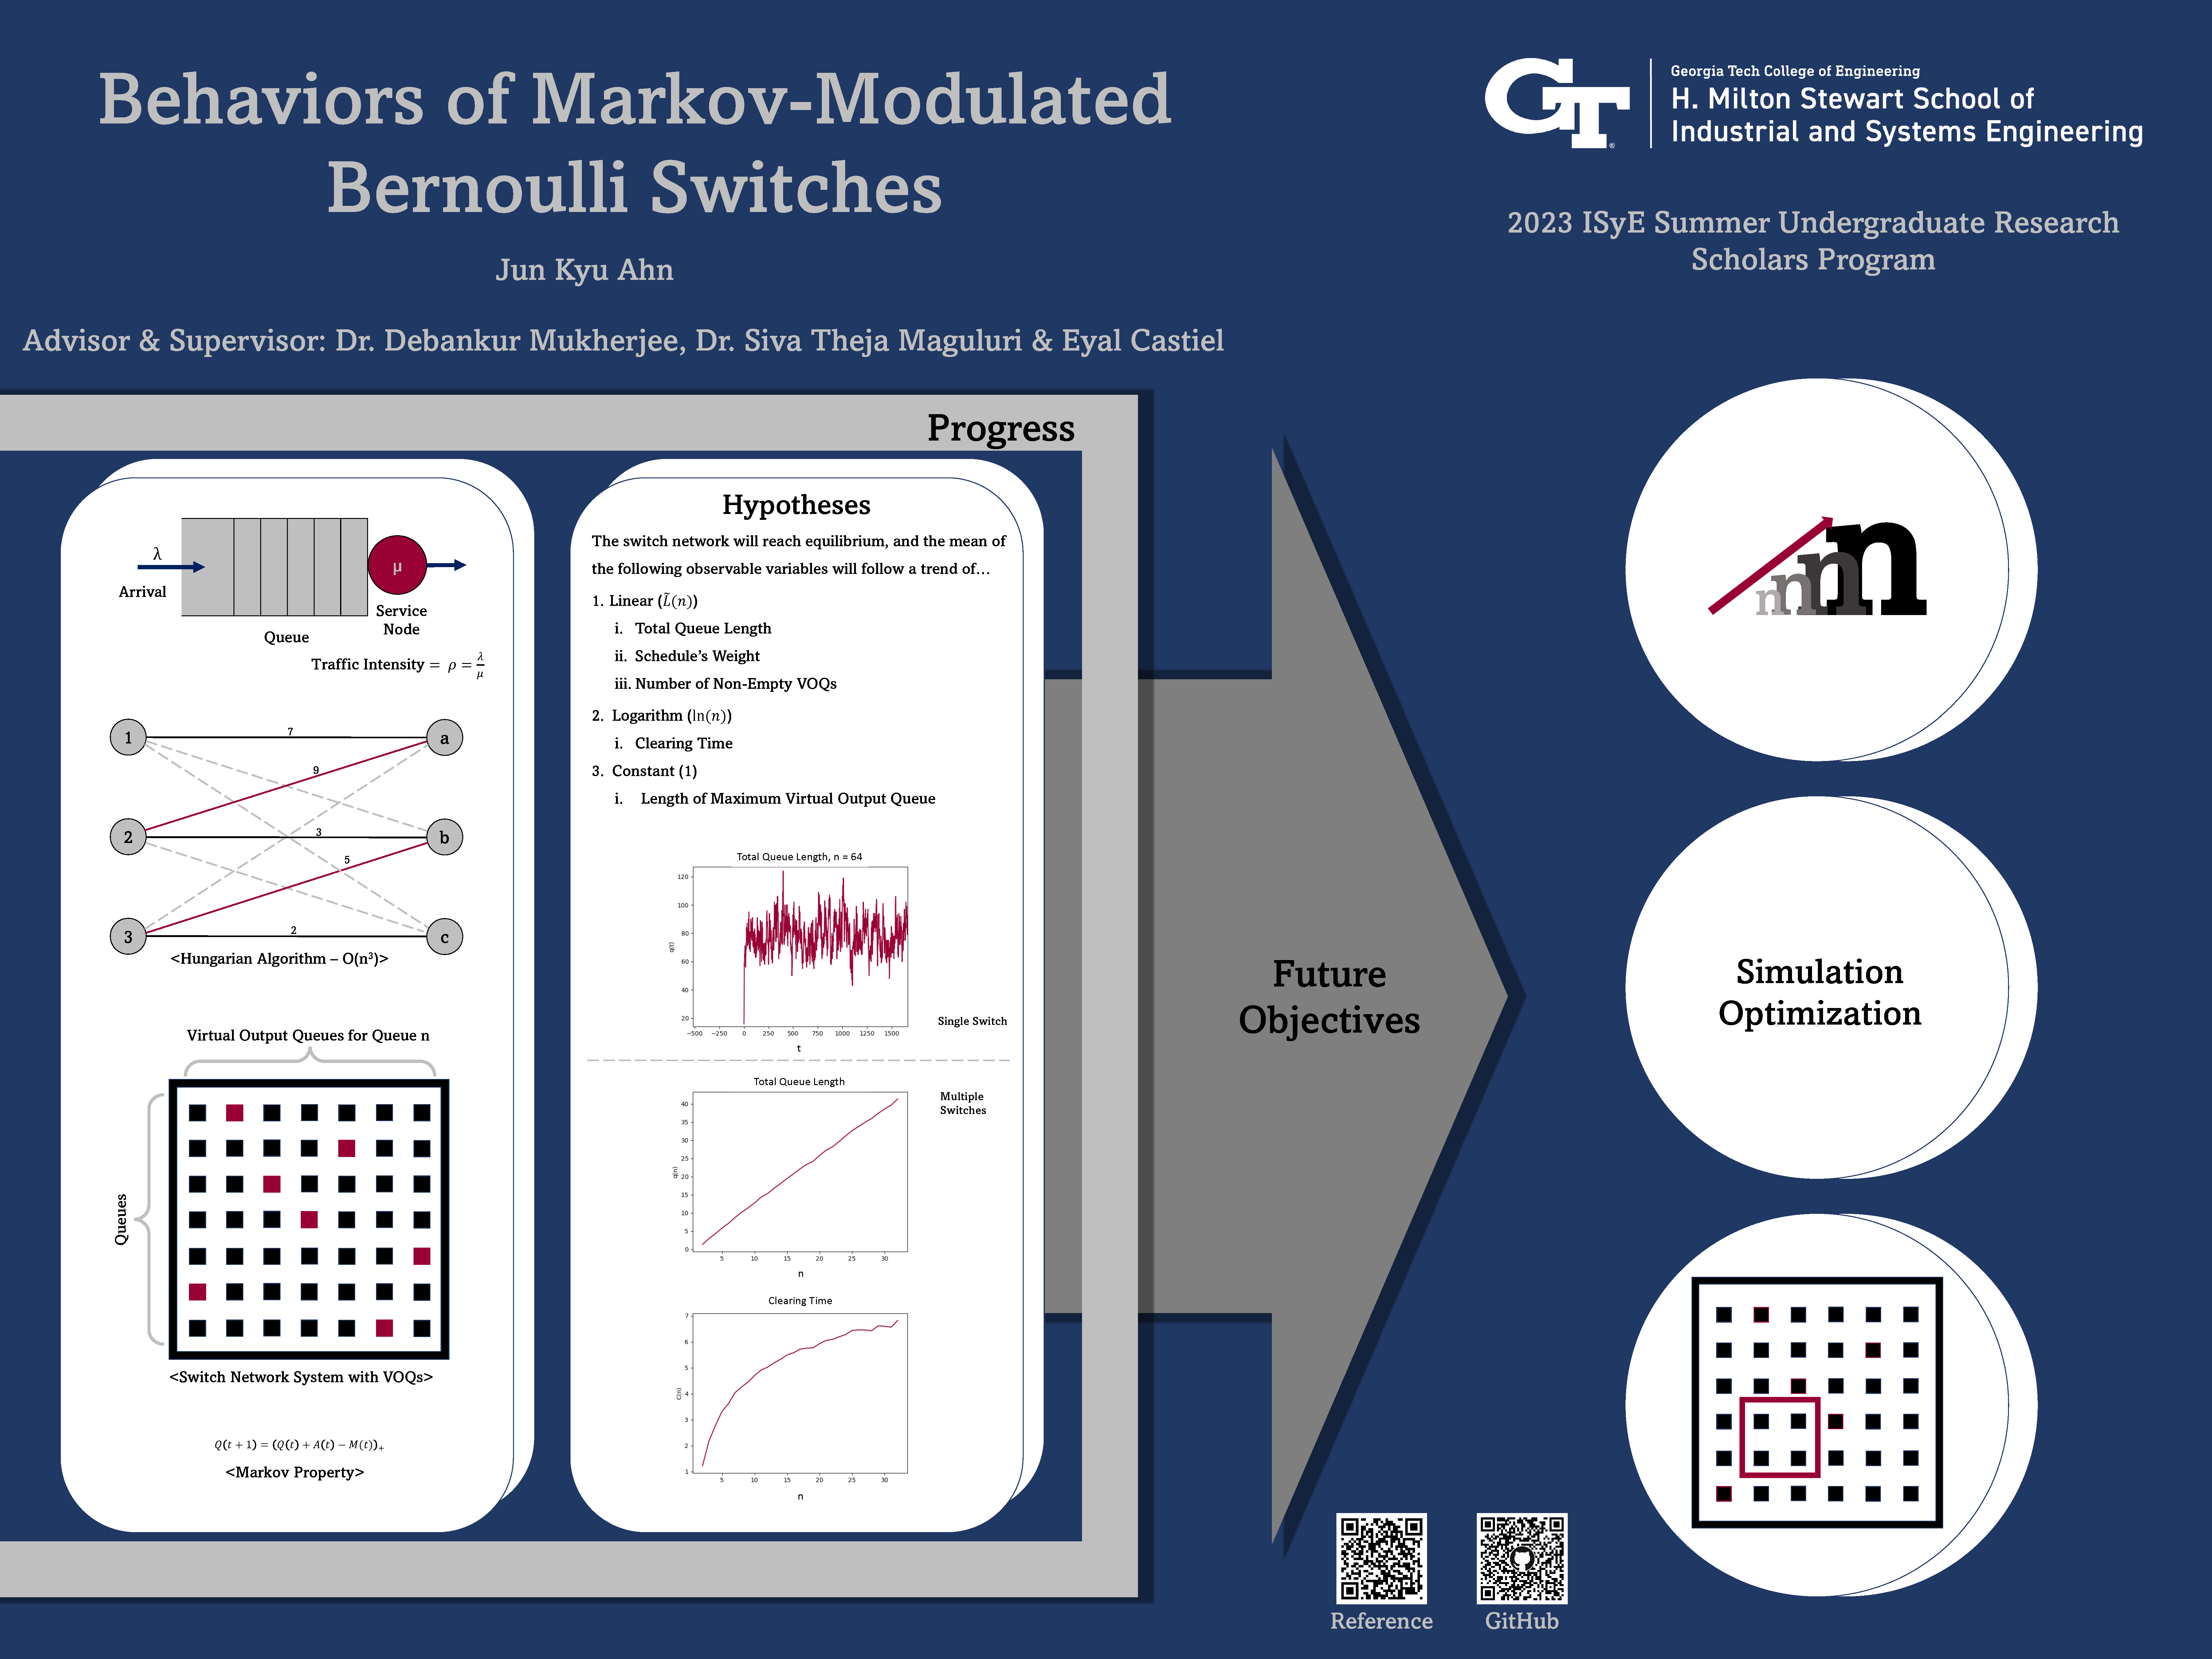 Behaviors of Markov-Modulated Bernoulli Switches poster